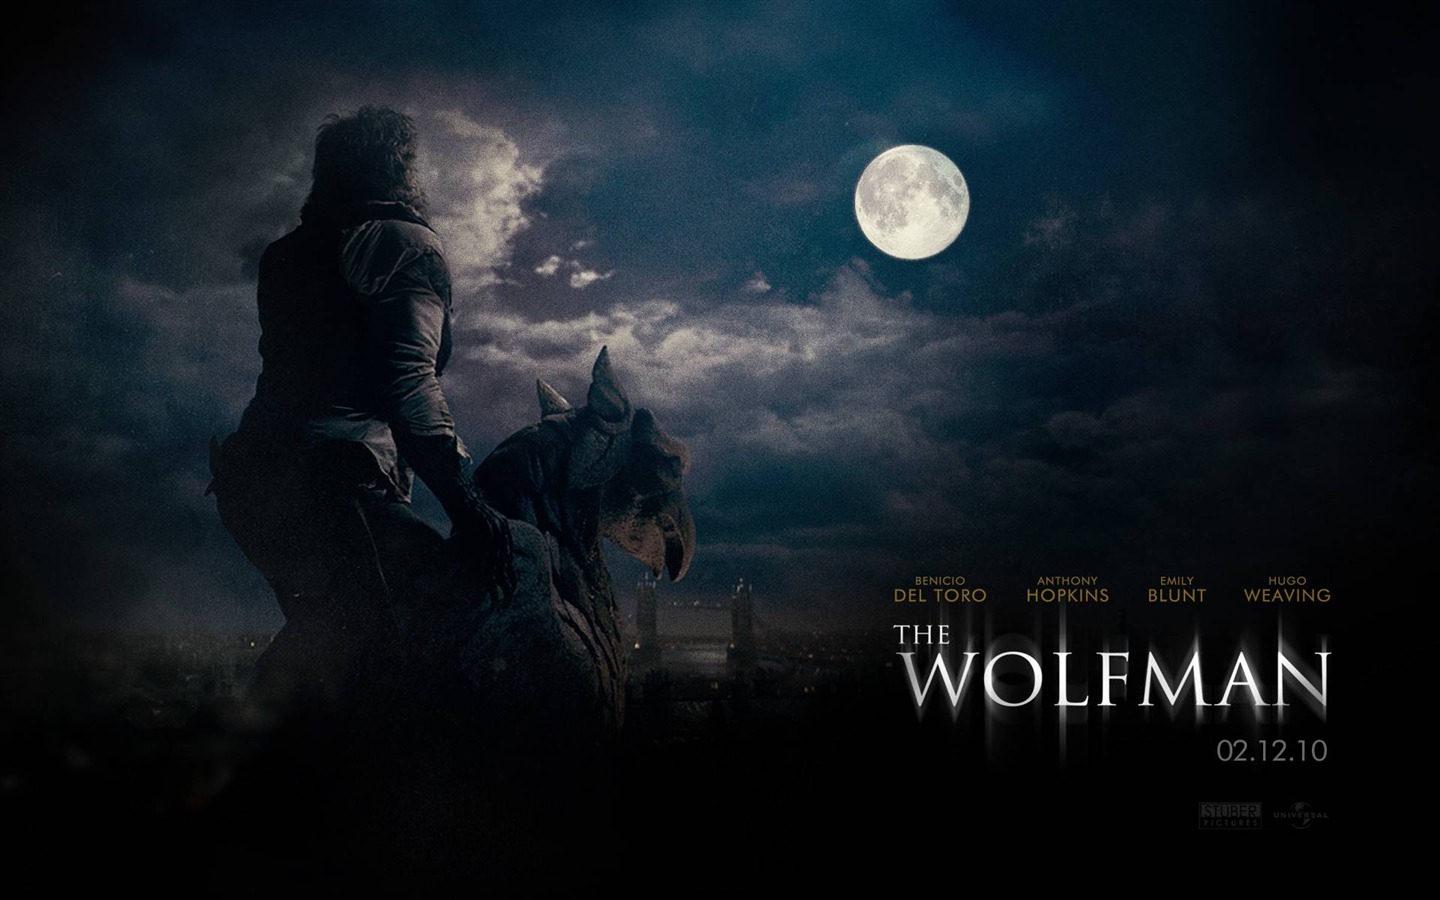 The Wolfman Movie Wallpapers #4 - 1440x900